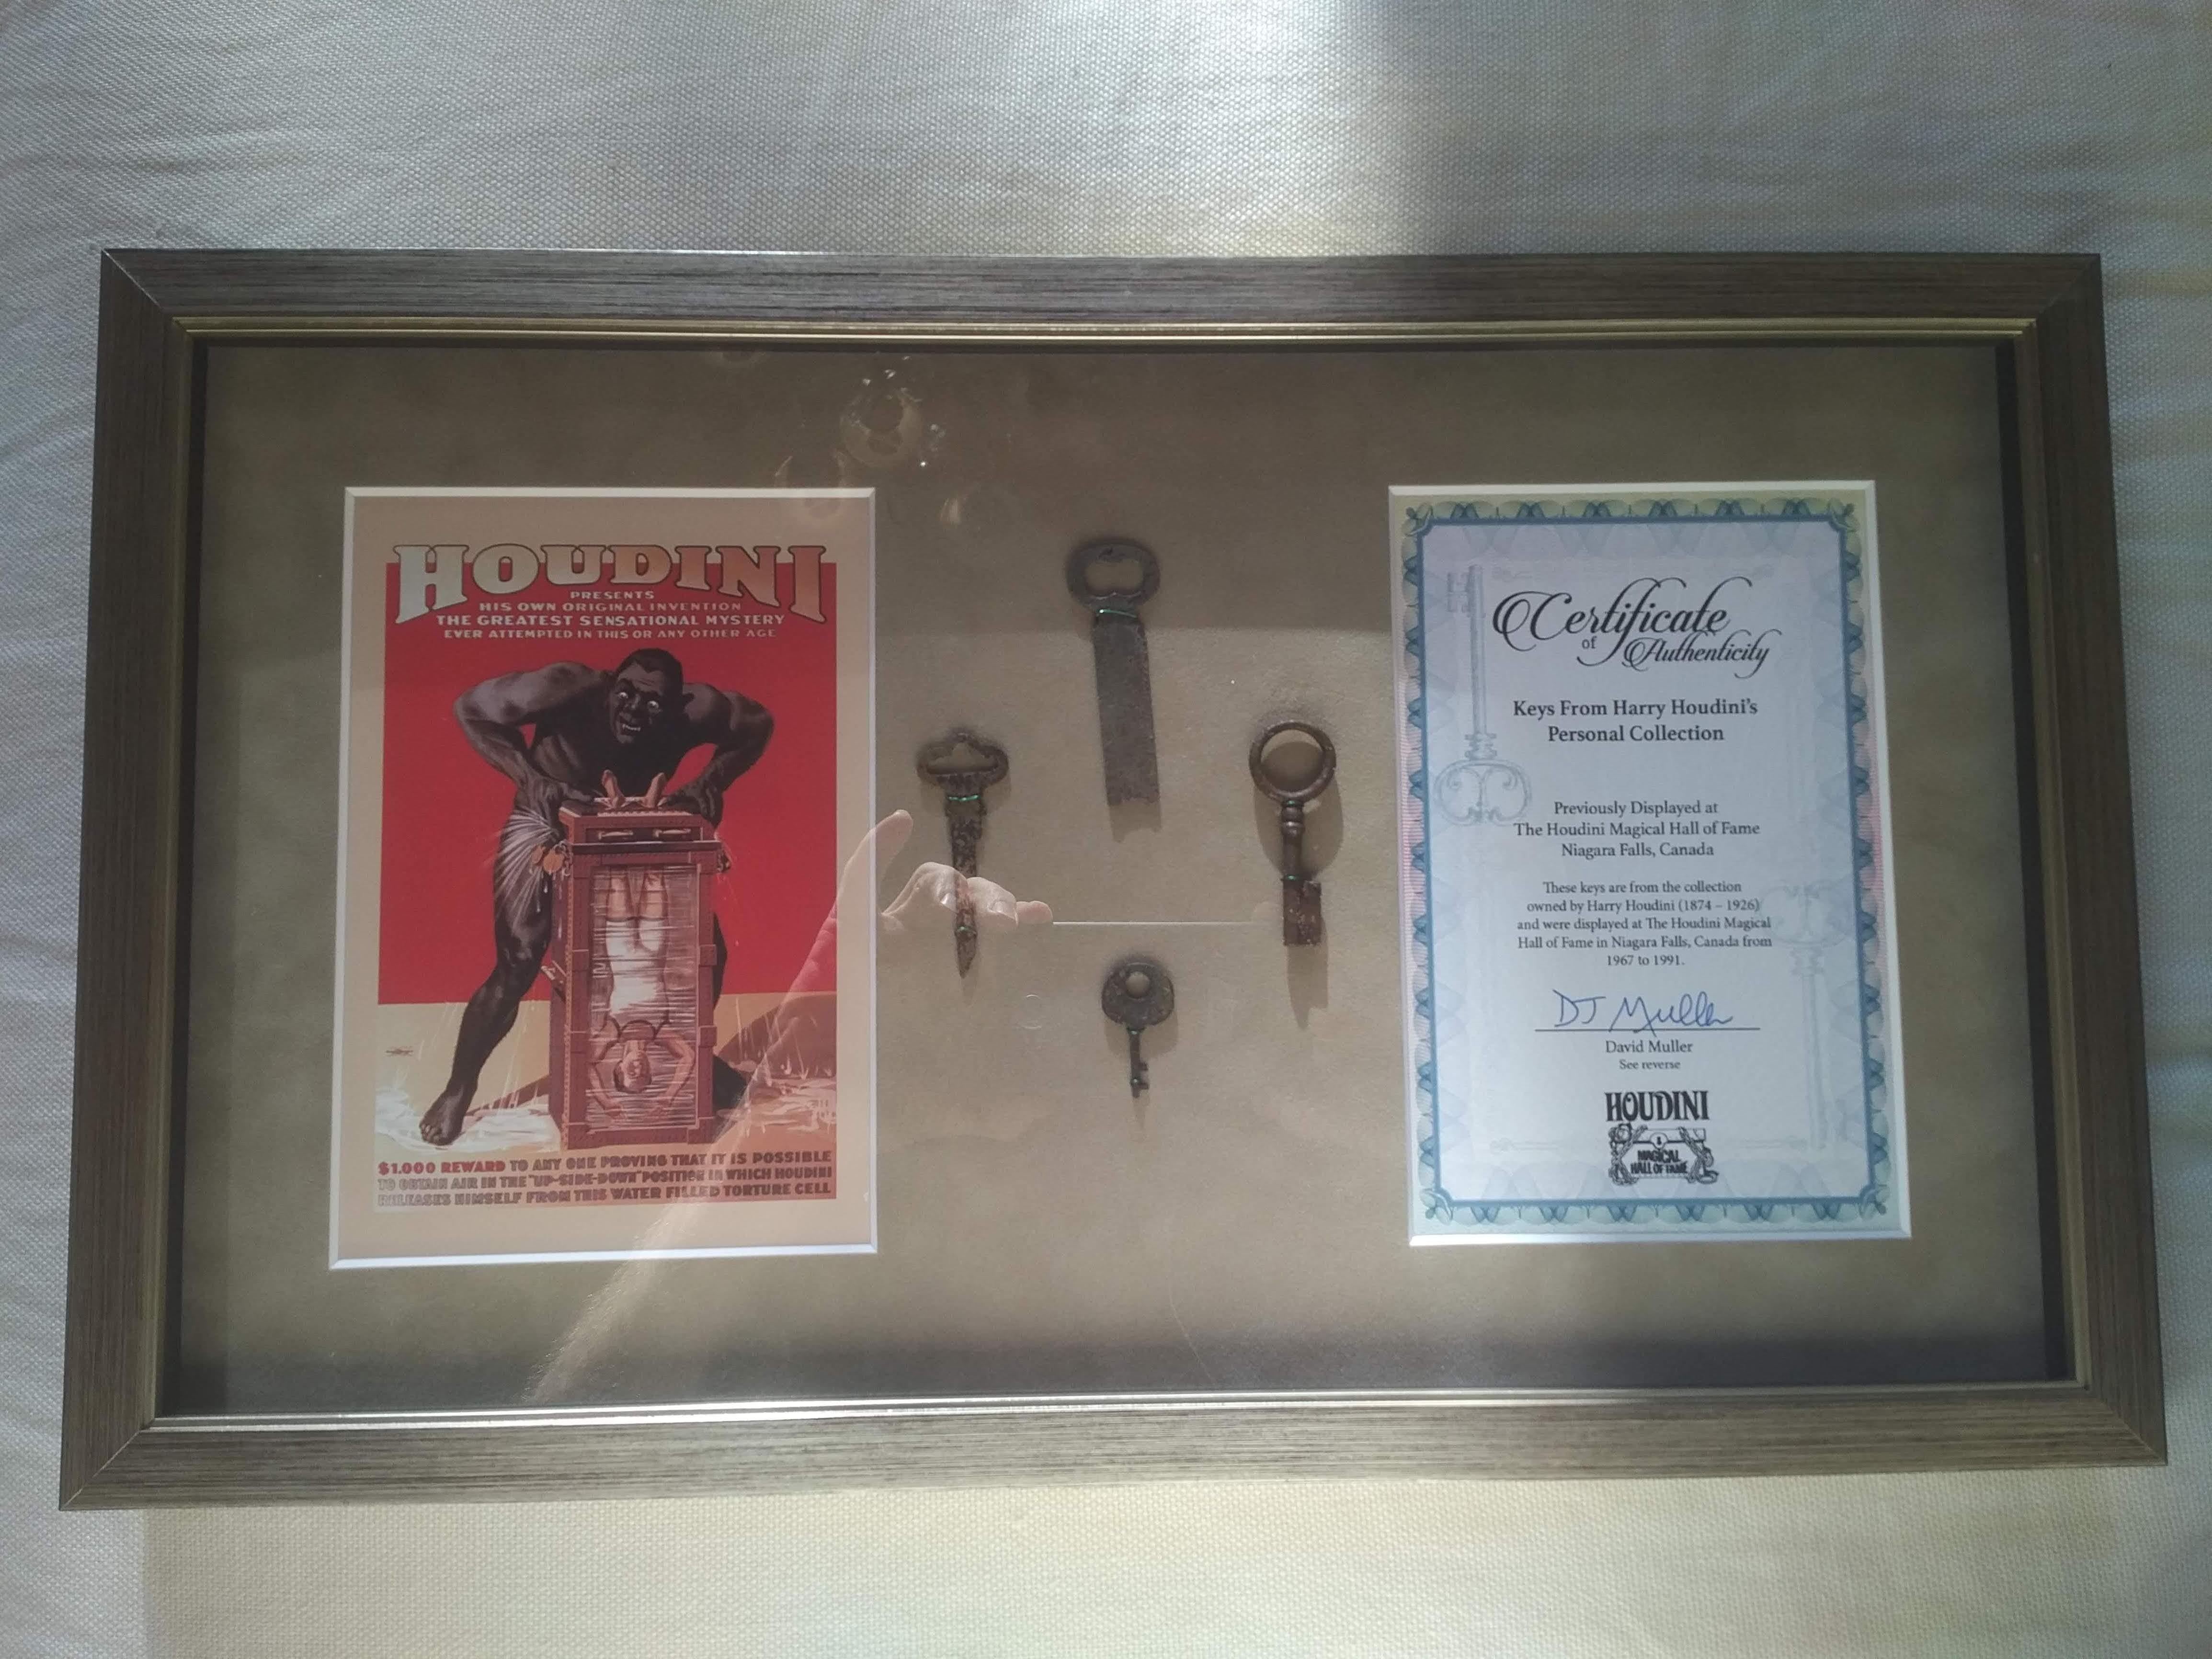 Original Houdini Keys from Houdini Museum with Certificate of Authenticity - Art by Harry Houdini